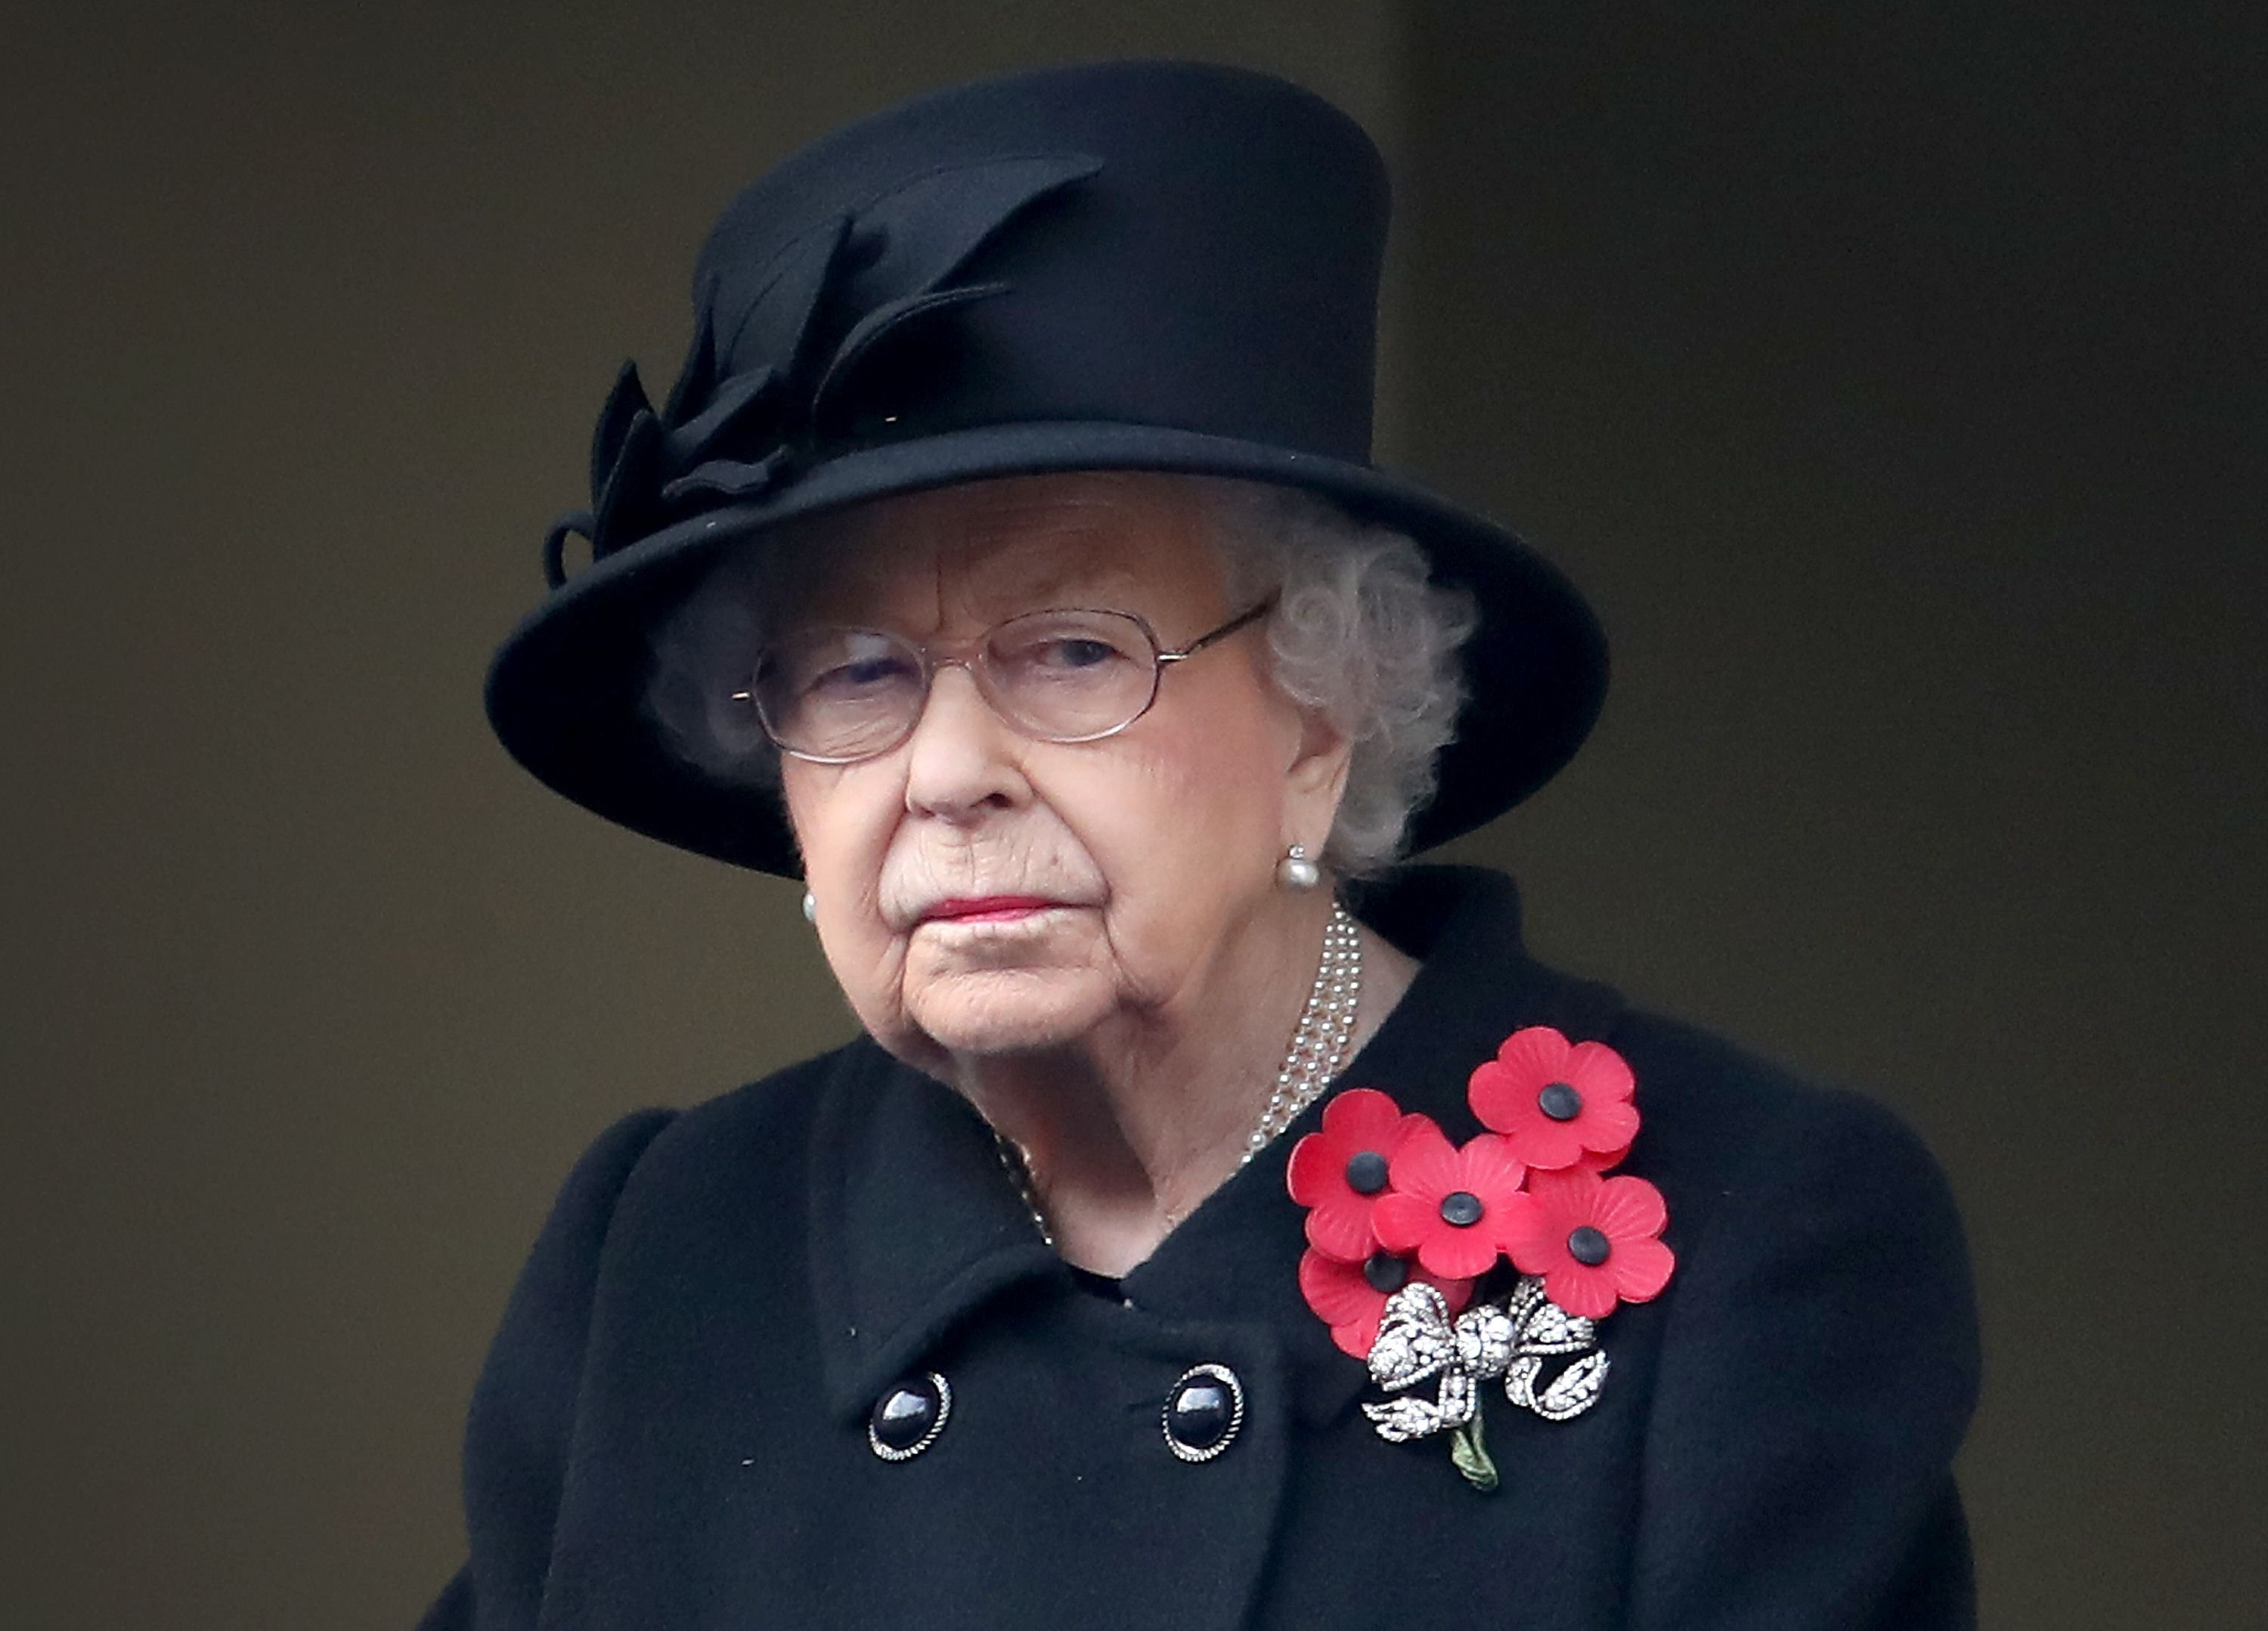 Queen Elizabeth II at the Service of Remembrance at the Cenotaph at The Cenotaph on November 08, 2020  Photo: Getty Images